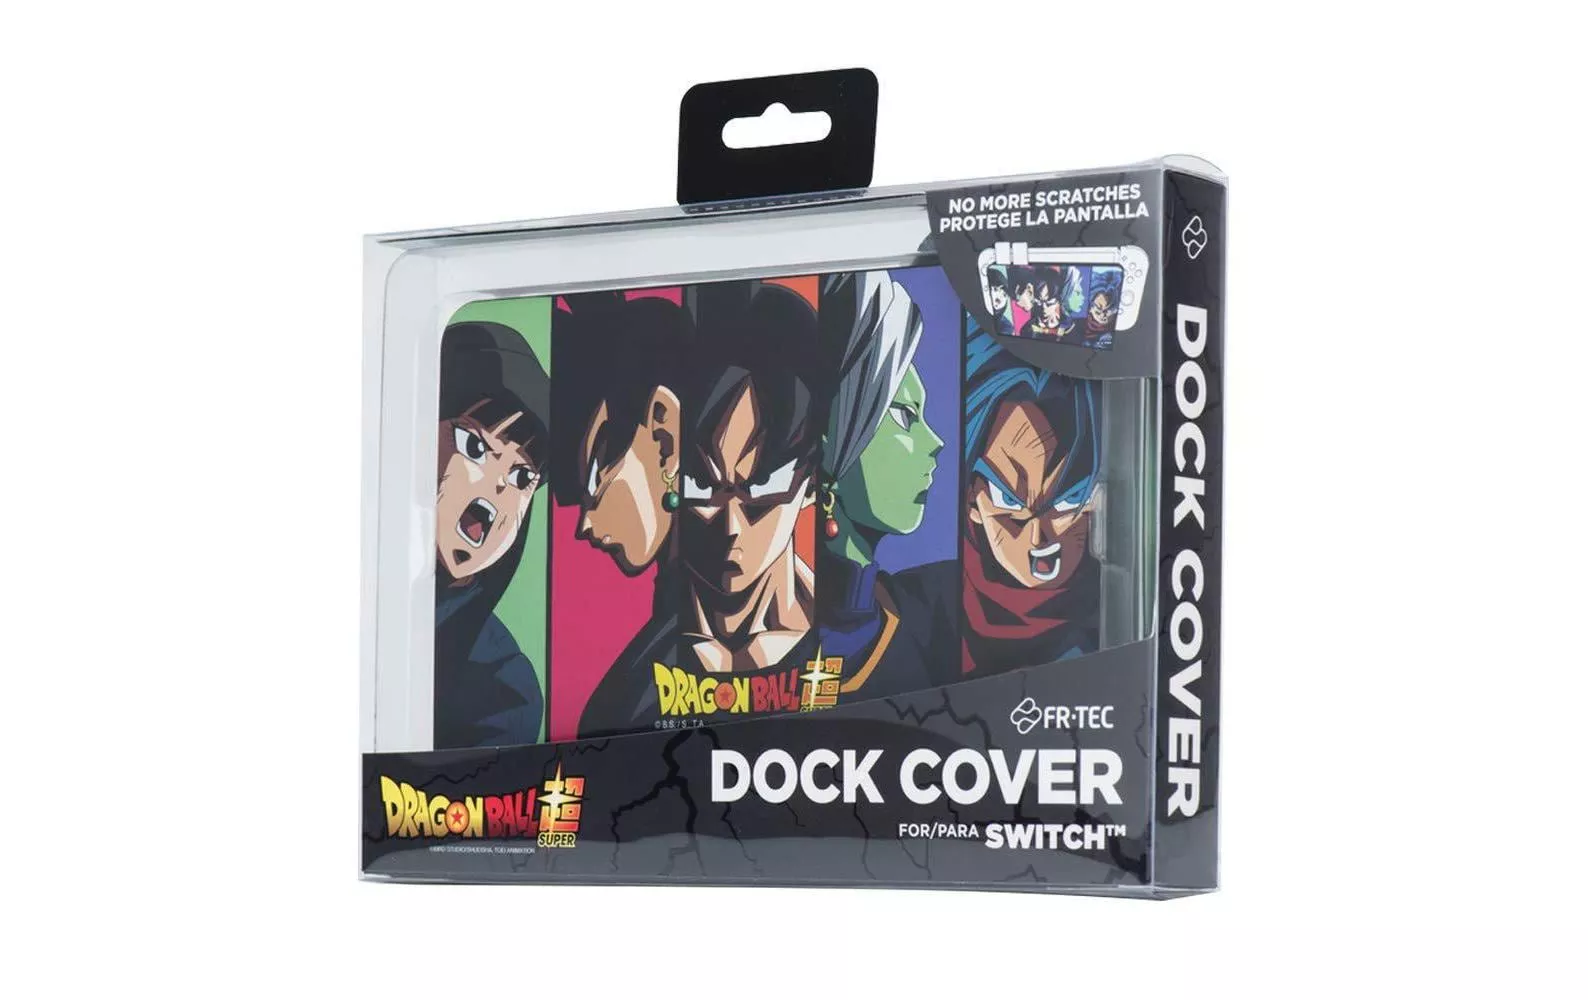 Housse de protection Dragon Ball Switch Dock Cover